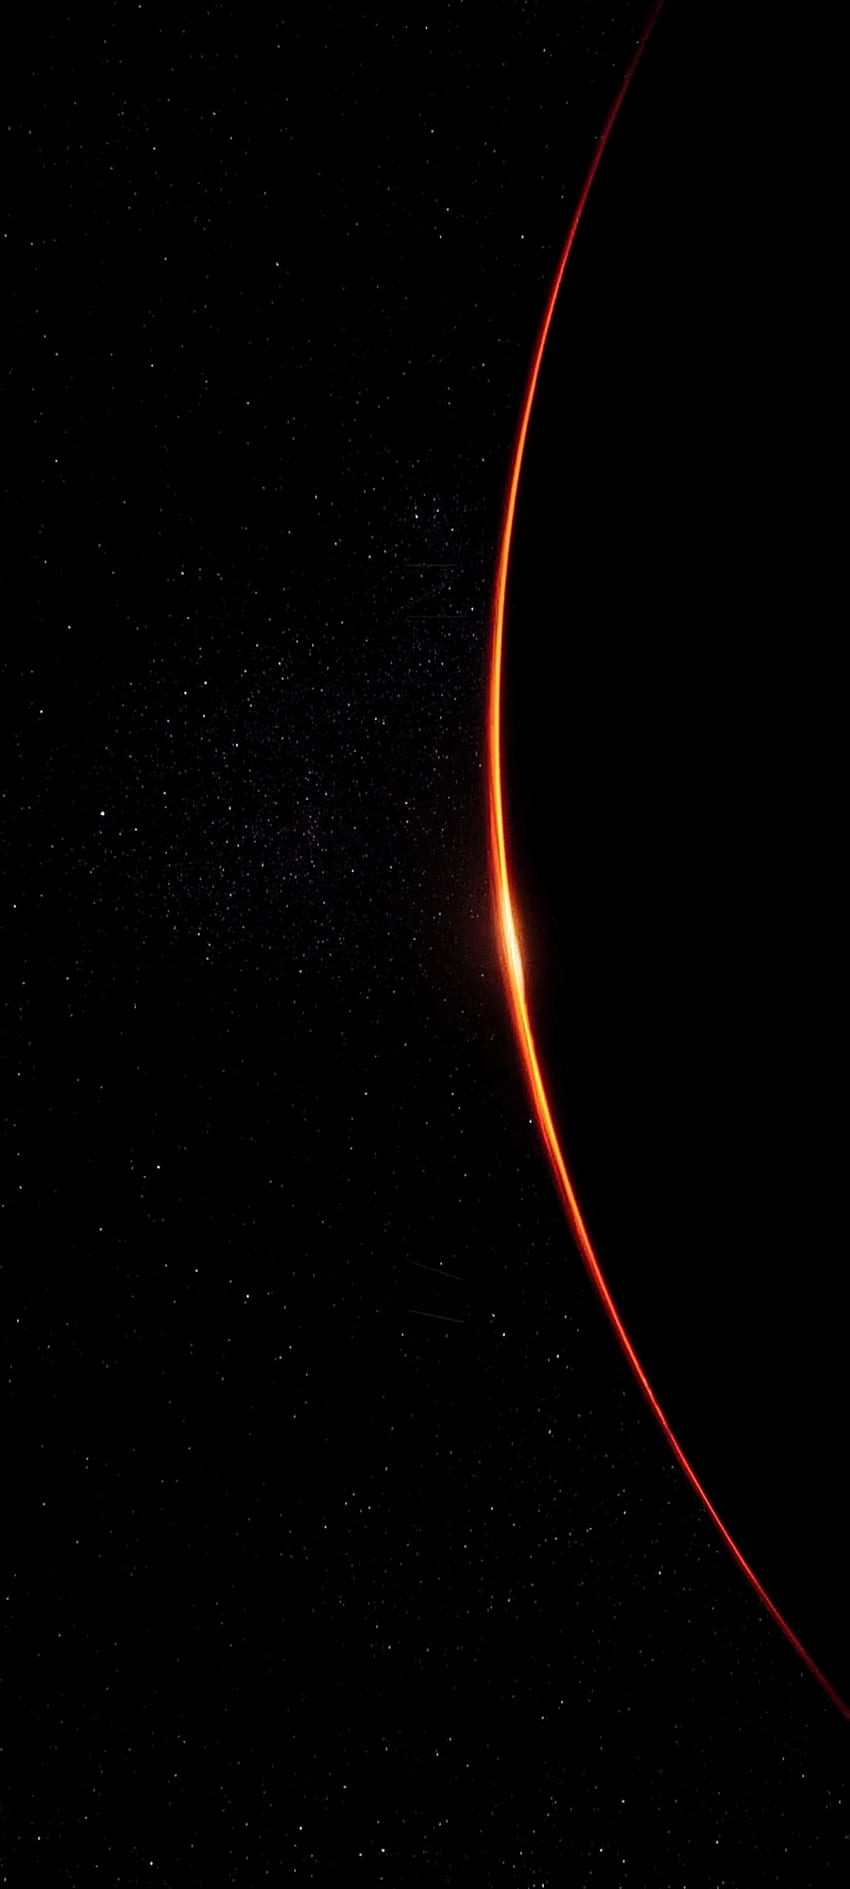 Mars []. Just A Screenshot From The Opening Sequence Of The Movie 'The Martian'. Seems To Make A Good Dark AMOLED ! : R Amoledbackground, 1080x2400 Amoled HD phone wallpaper